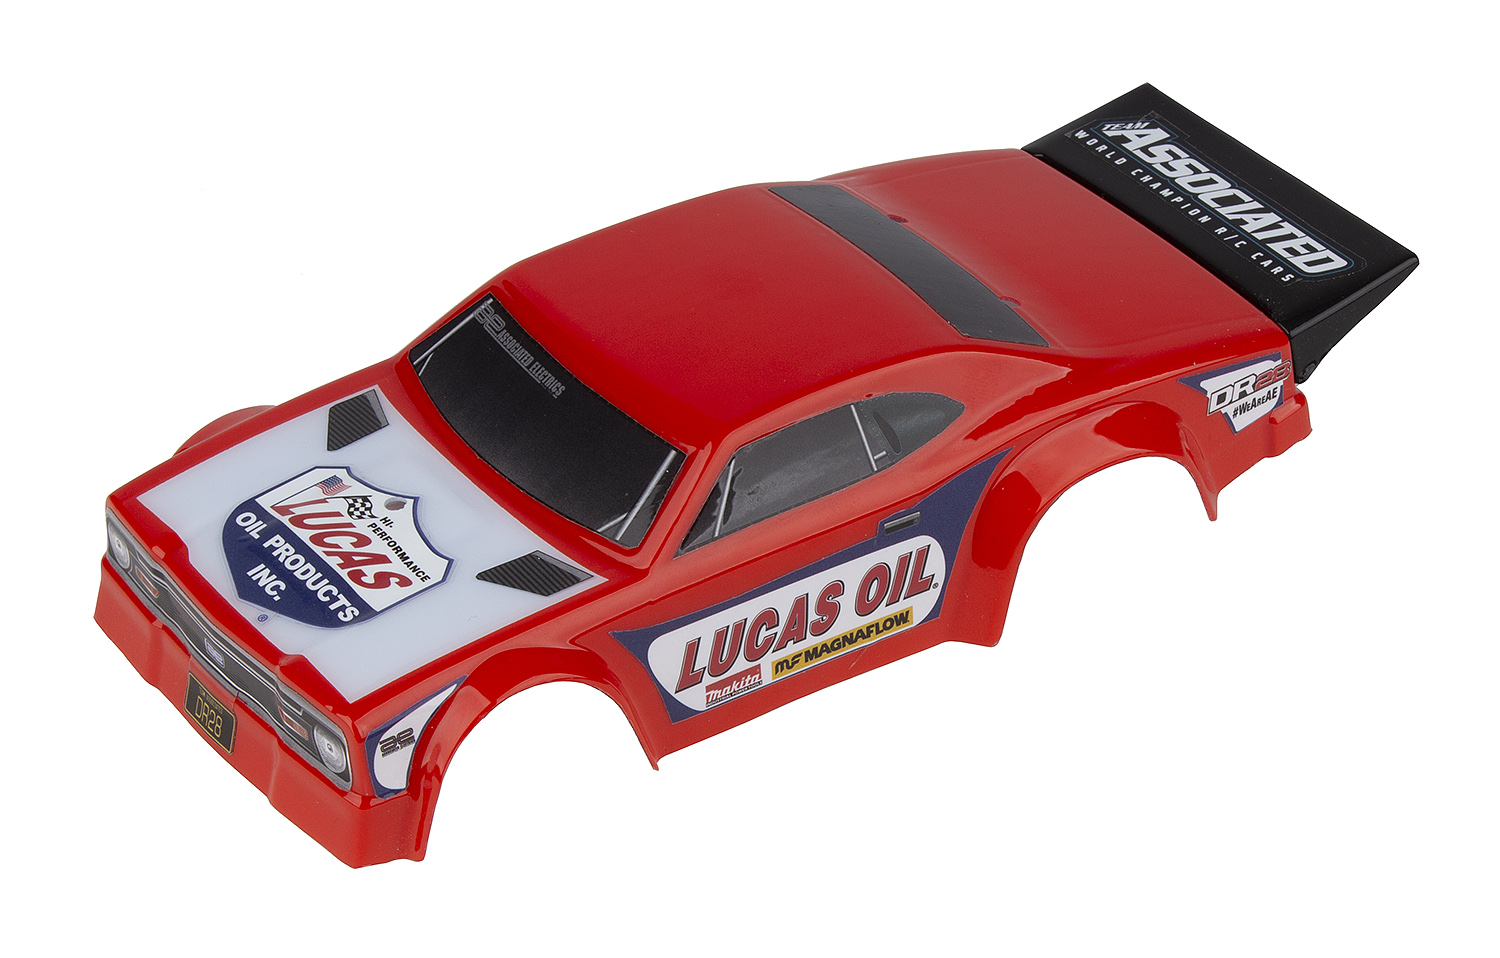 DR28 Lucas Oil RTR body, painted